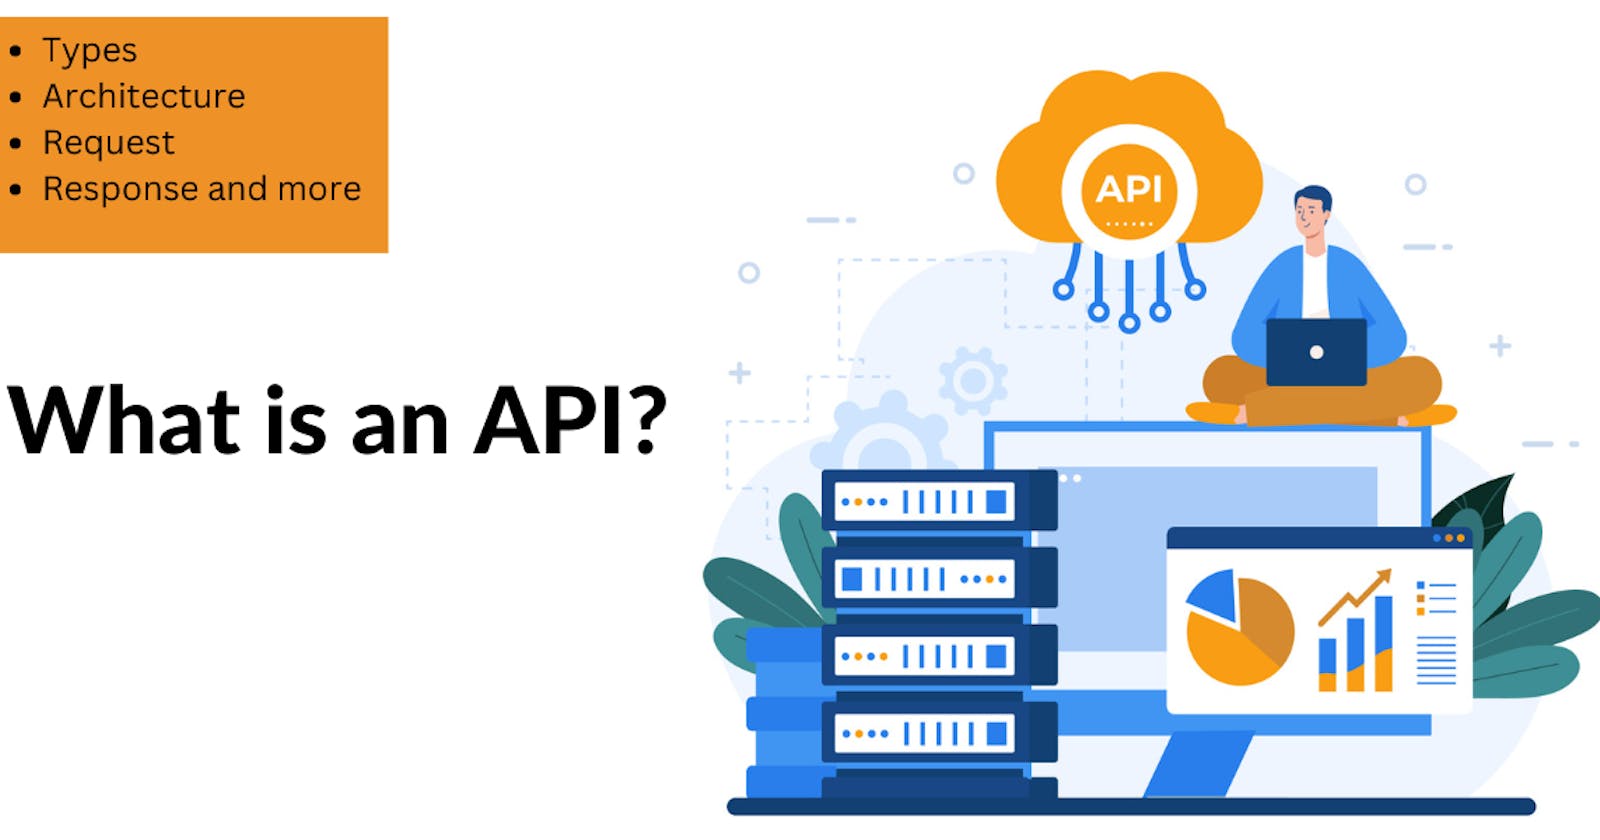 Teaching you all about APIs in 12 mins